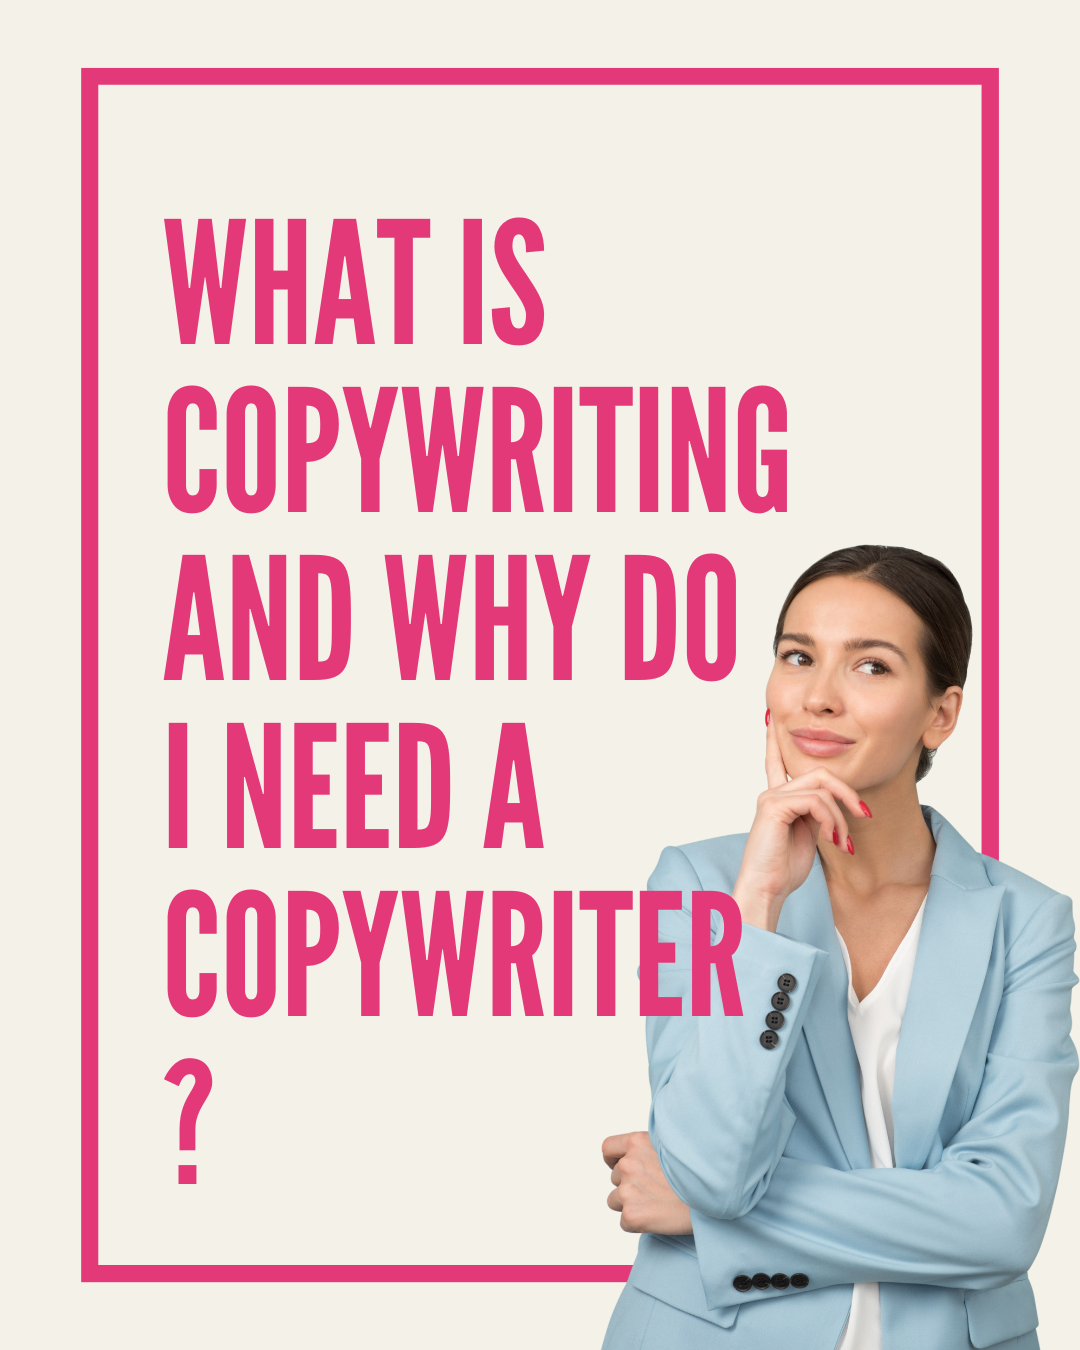 What is copywriting and why do you need a copywriter?